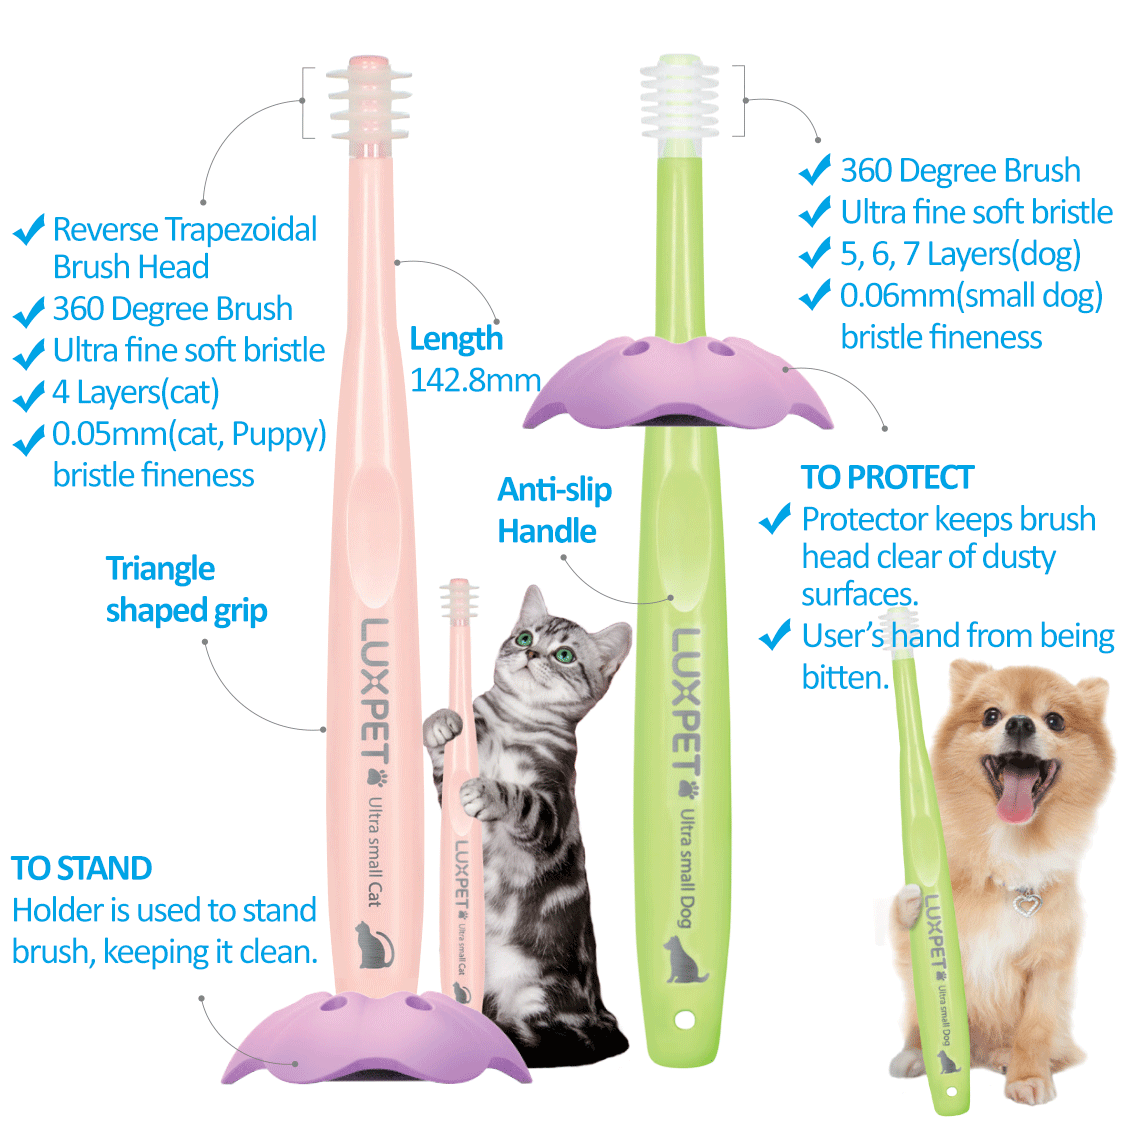 Prduct Feature and Specification of LUXPET for Pet Use